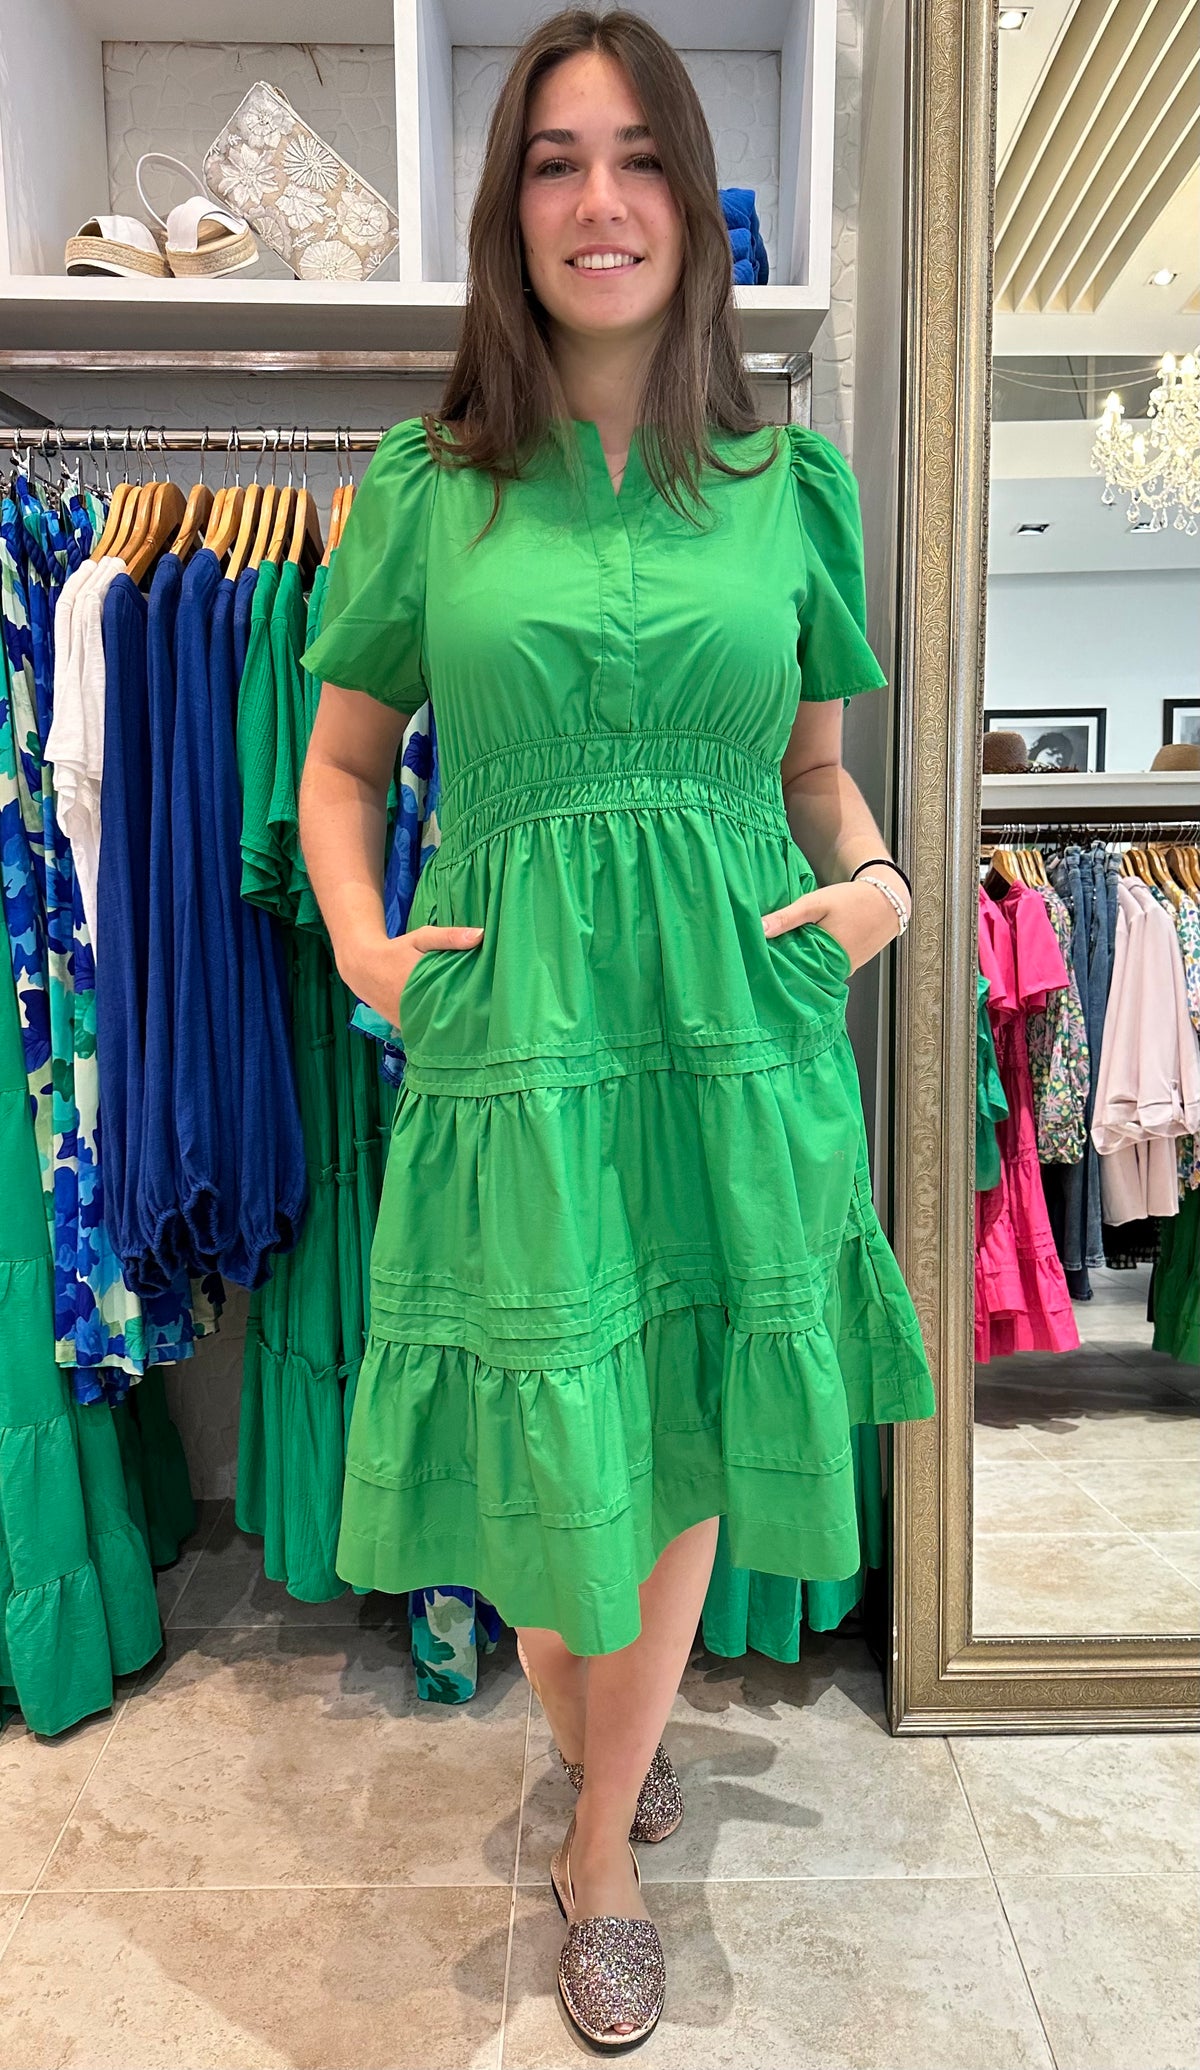 Tilly Tiered Dress Kelly Green